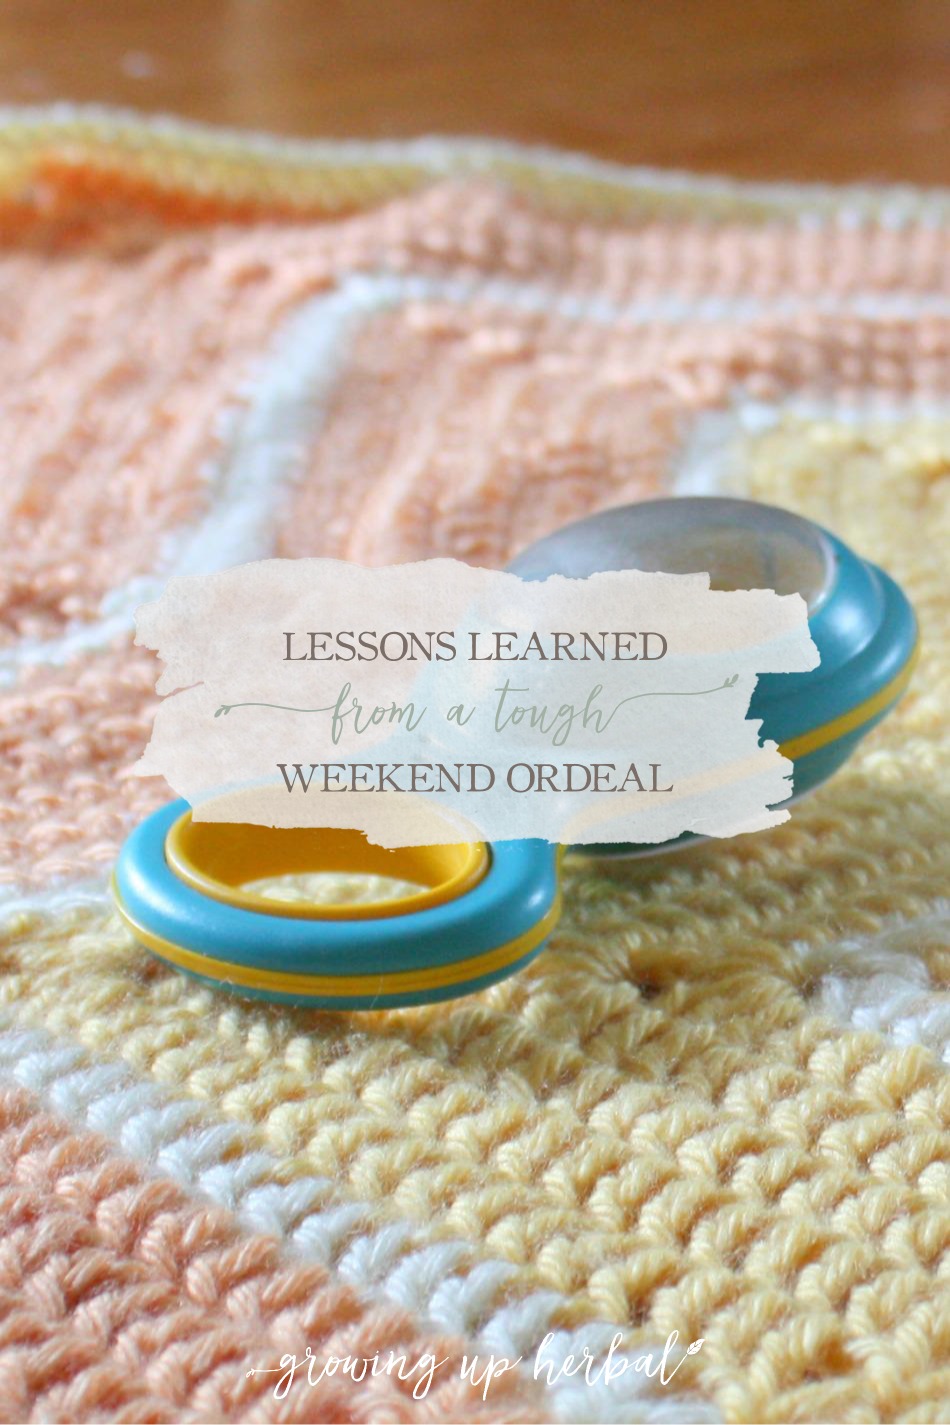 Lessons Learned From A Tough Weekend Ordeal | Growing Up Herbal | Infection, antibiotics, and hospitalization with an infant and a natural mama. No fun!